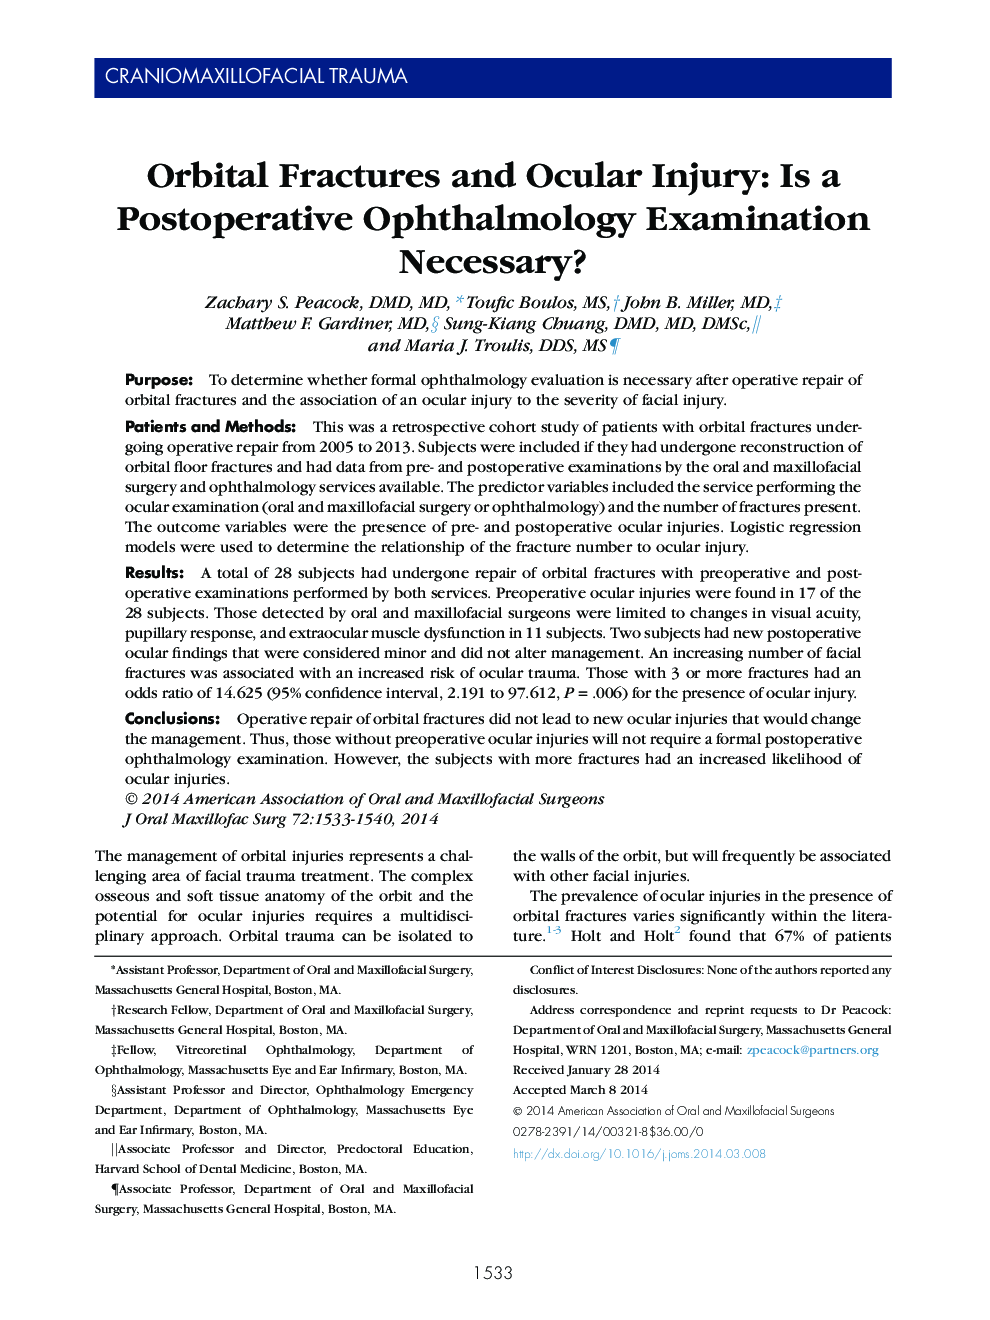 Orbital Fractures and Ocular Injury: Is a Postoperative Ophthalmology Examination Necessary?